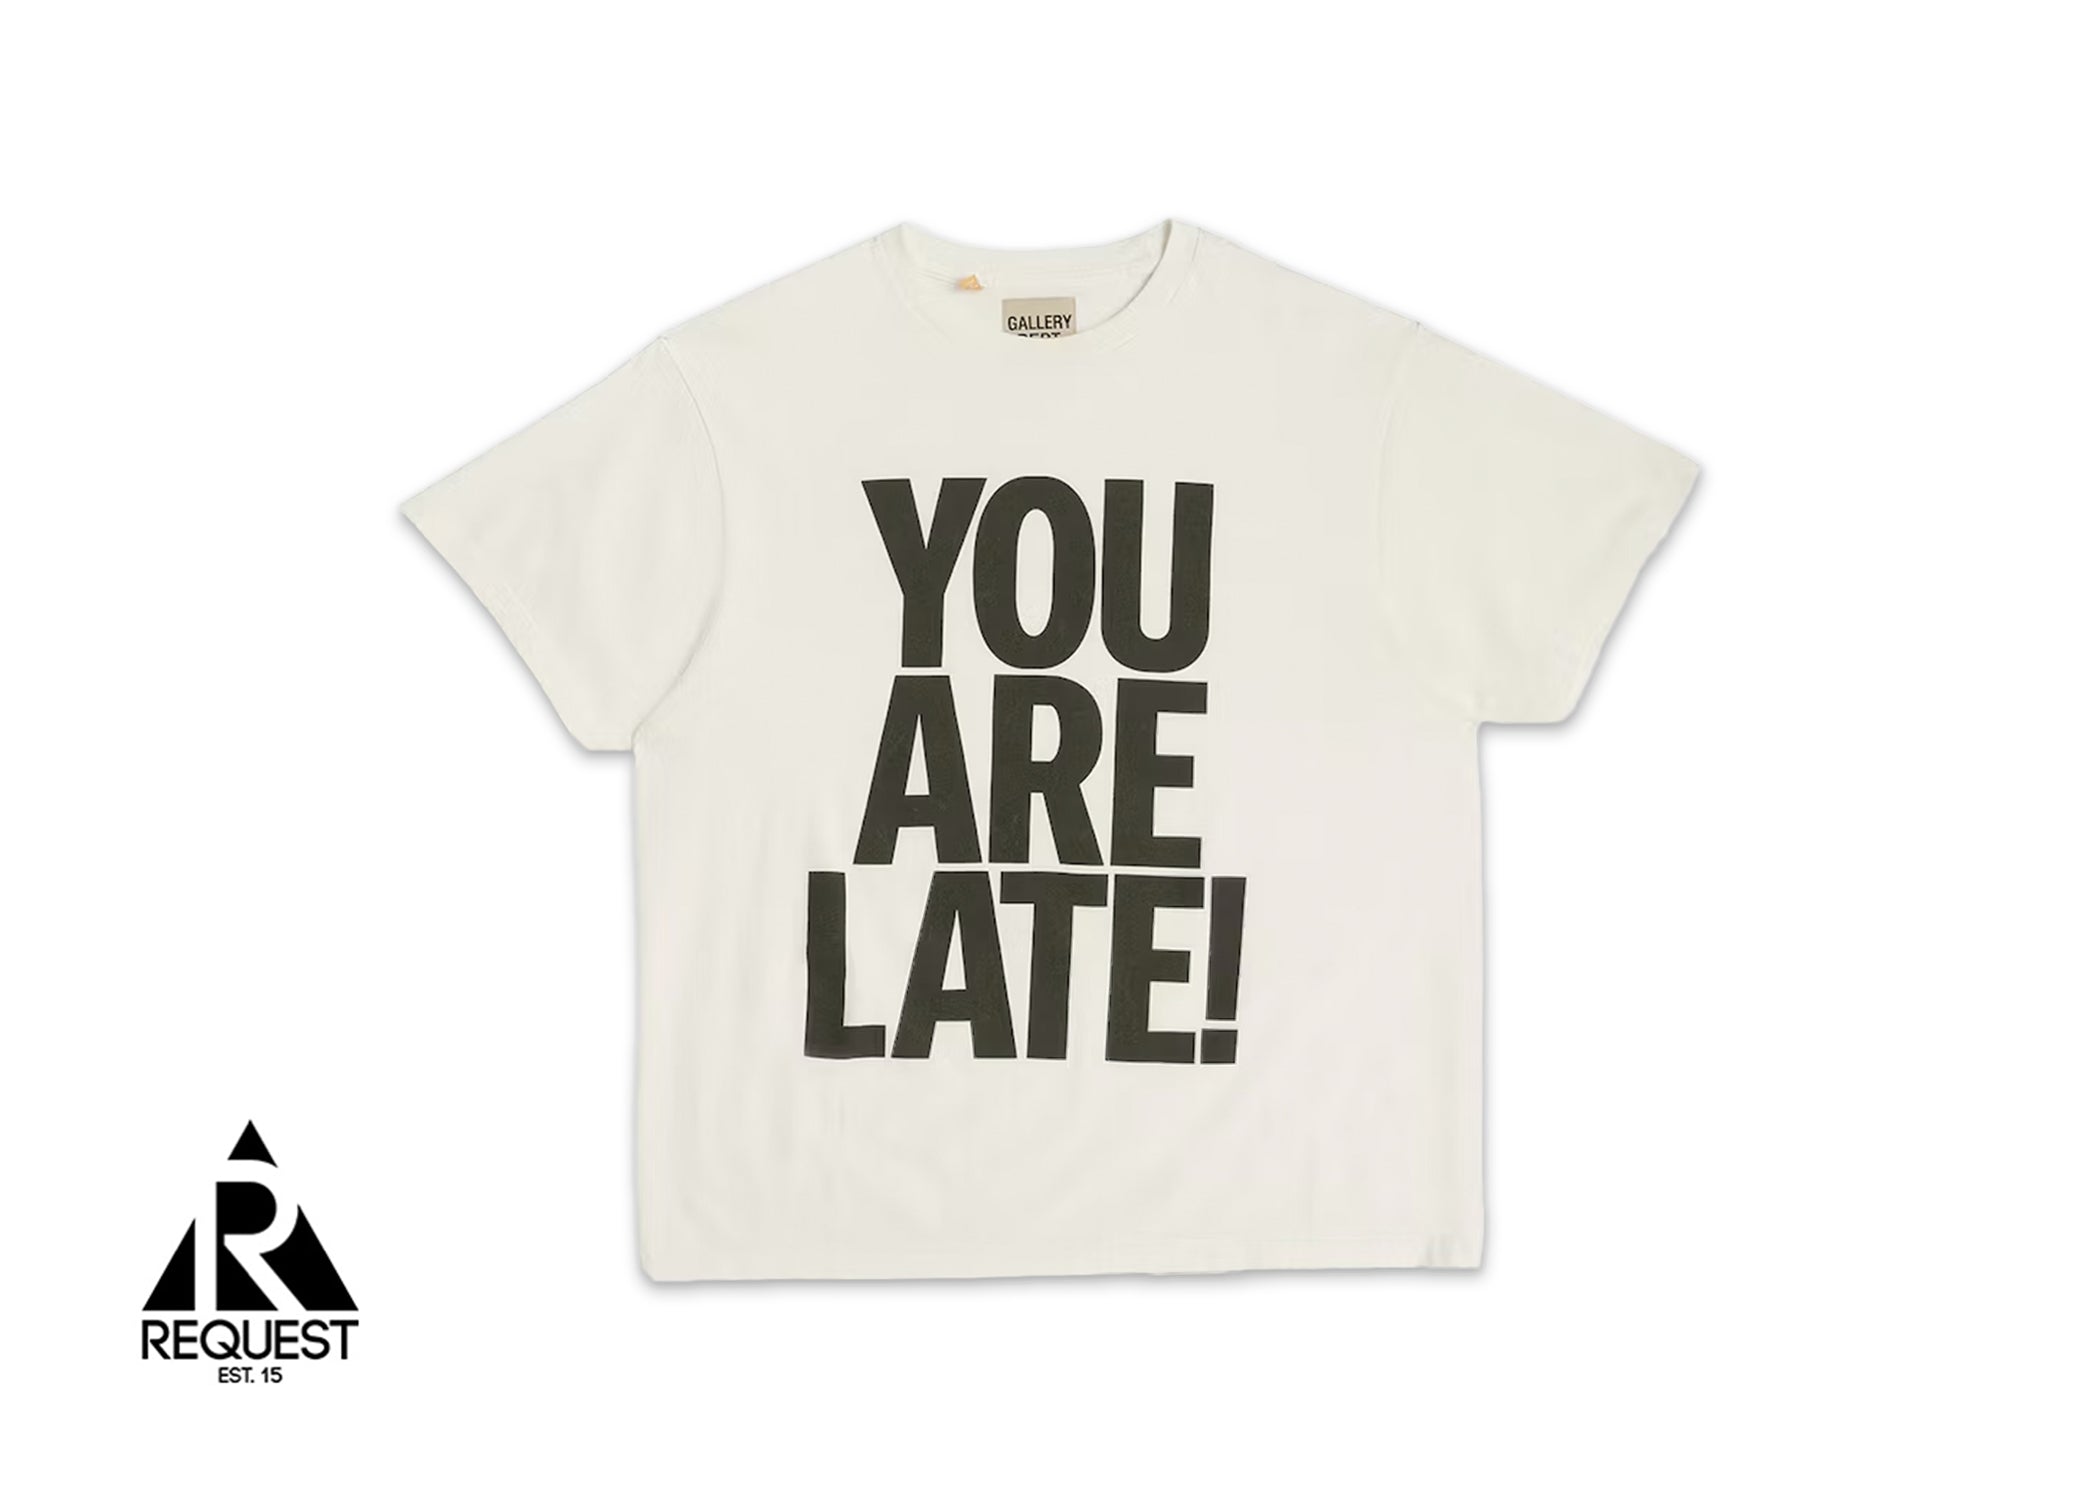 Gallery Dept. Tee "You Are Late"